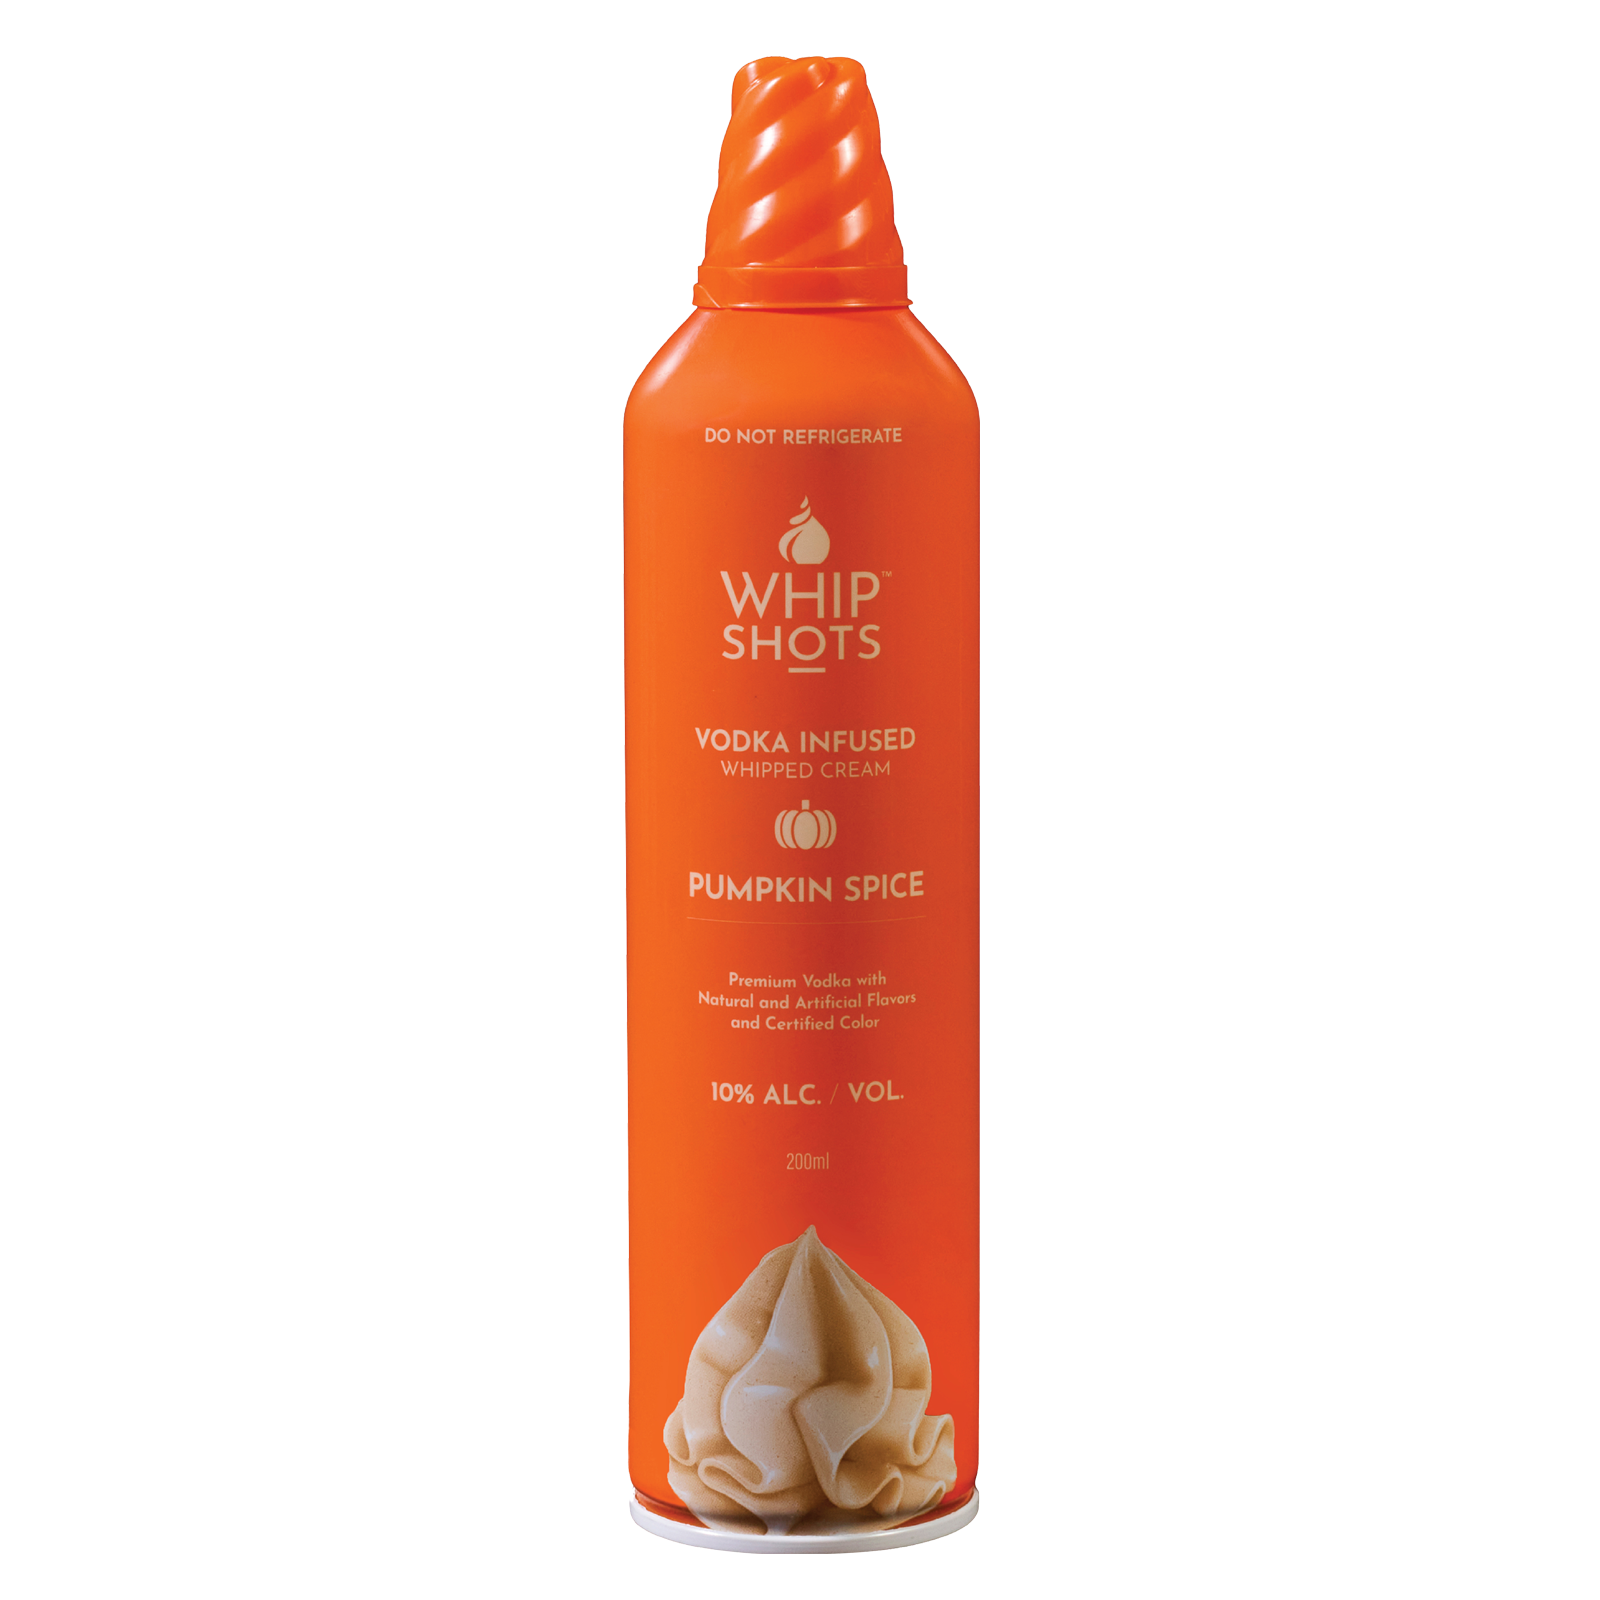 Whipshots Pumpkin Spice Vodka Infused Whipped Cream 200ml (20 Proof)